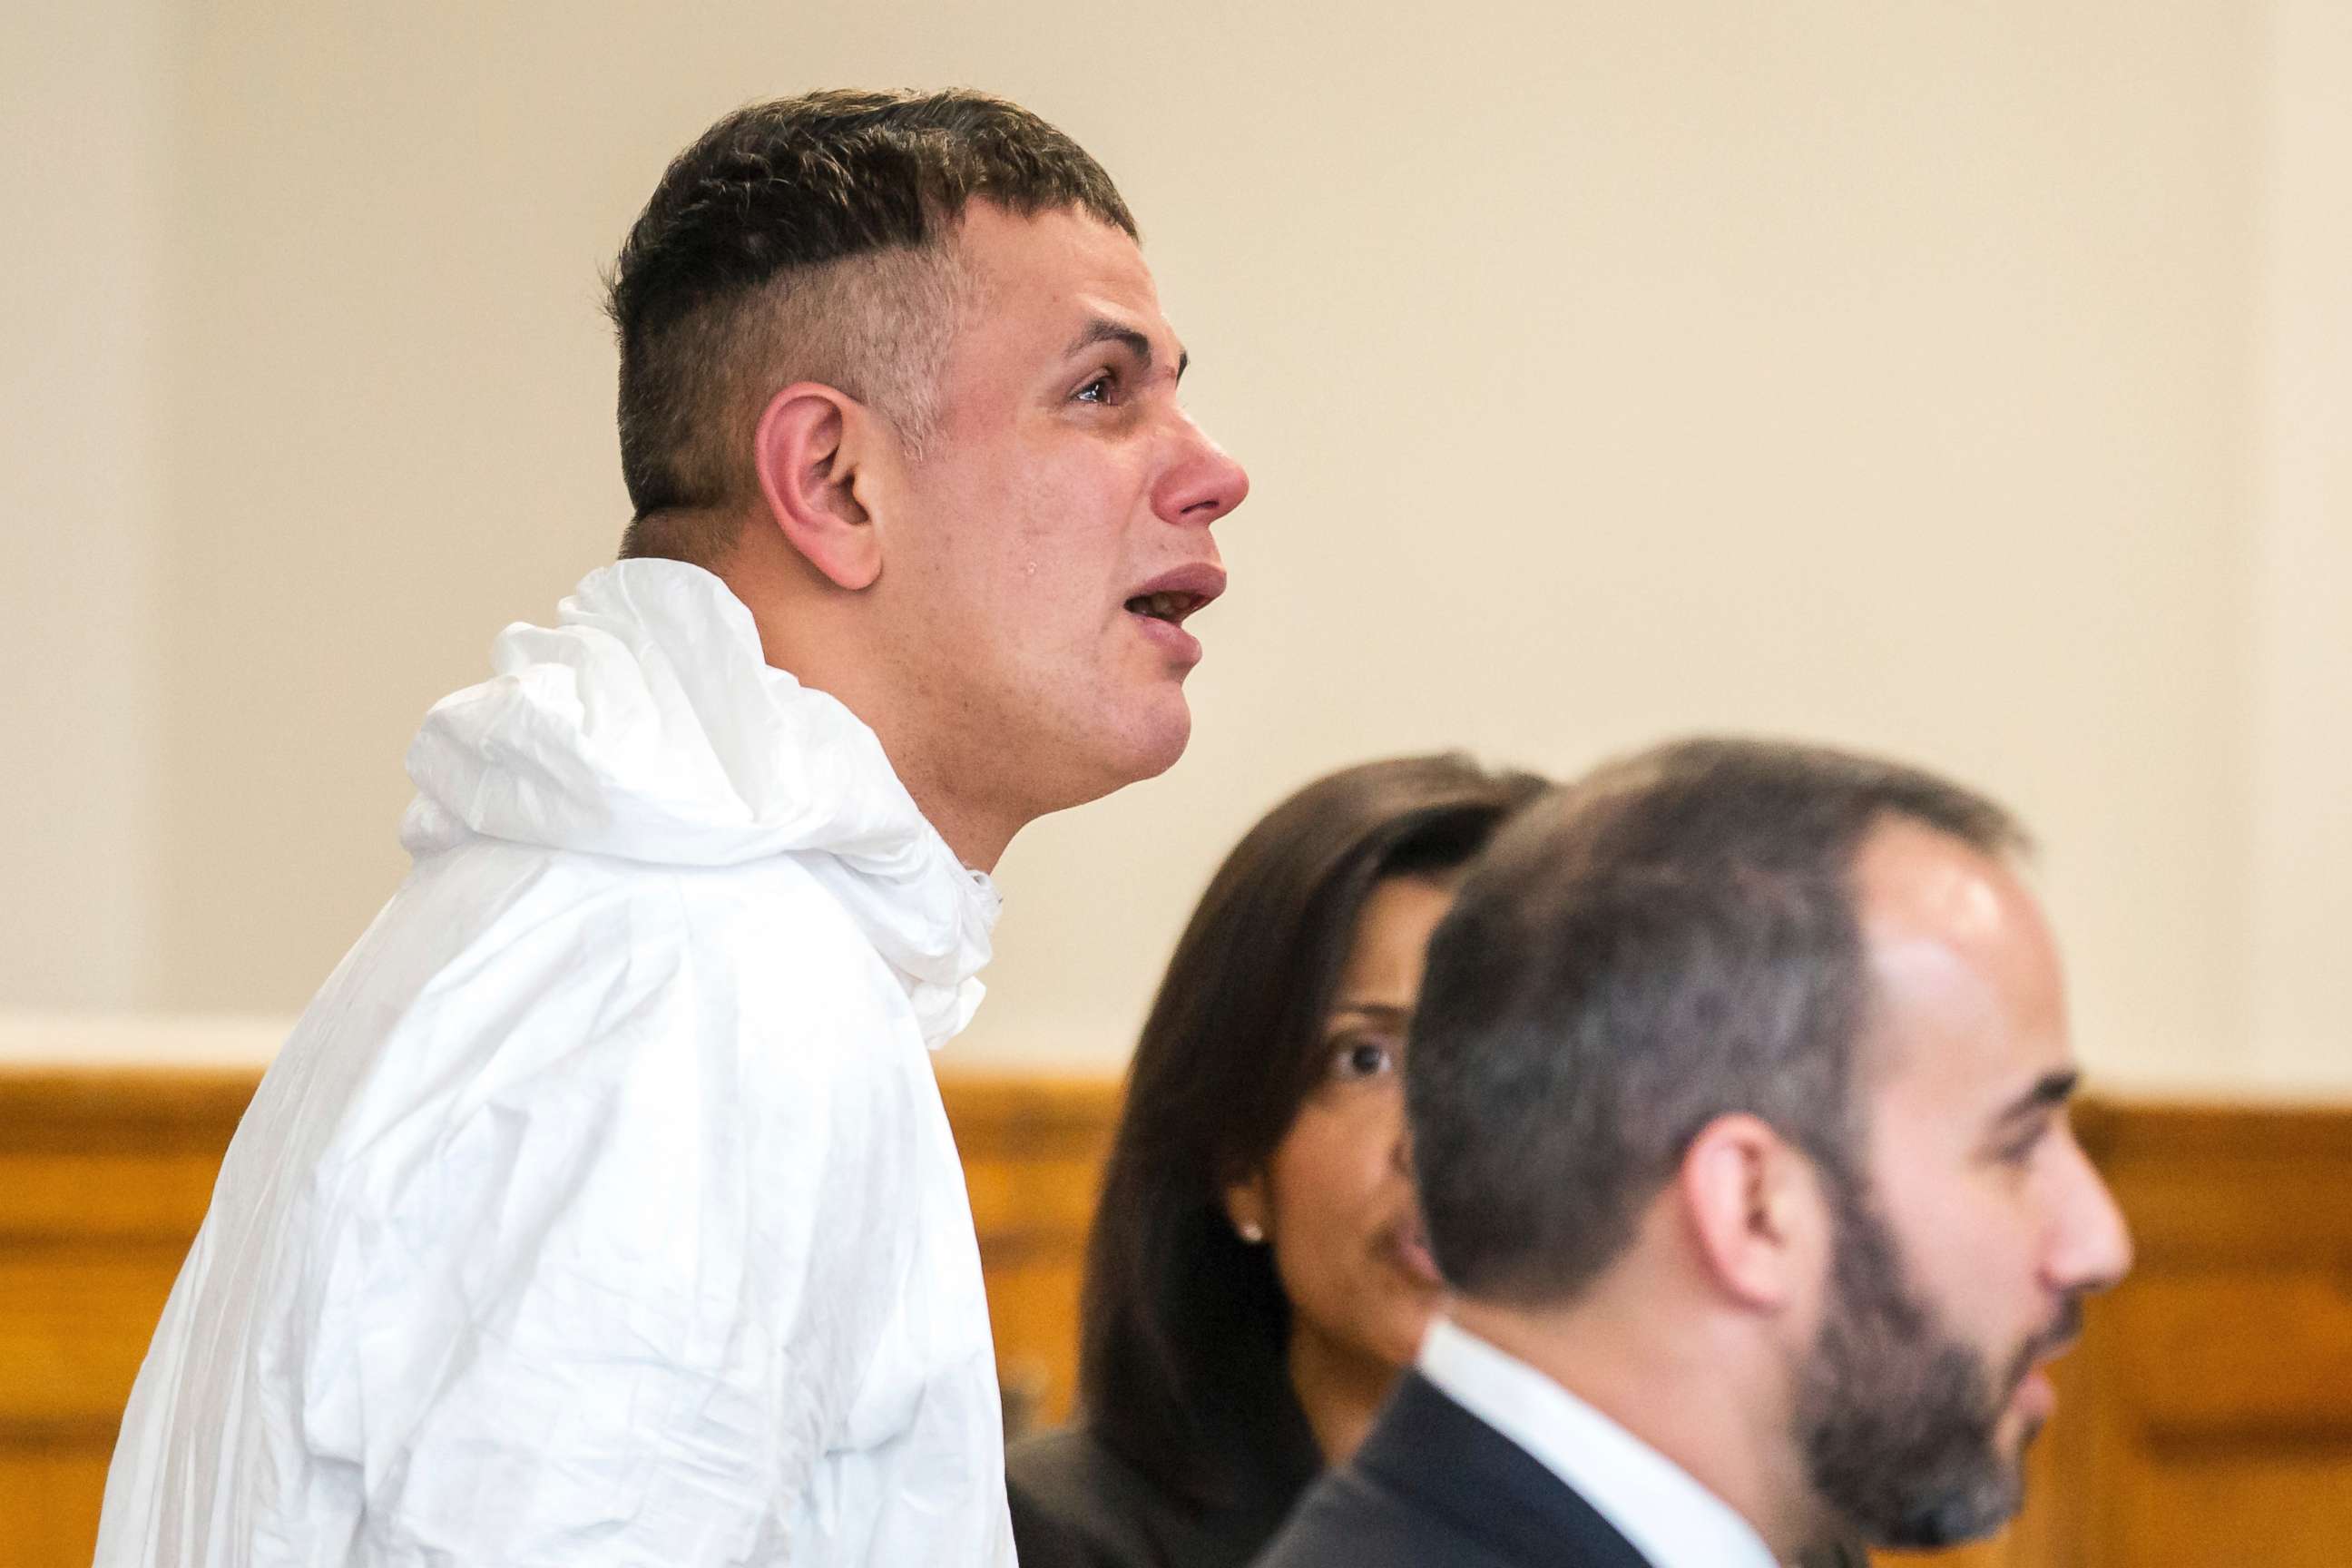 PHOTO: Victor Pena, left, is arraigned on kidnapping charges at the Charlestown Division of the Boston Municipal Court in Charlestown, Mass., Jan. 23, 2019.